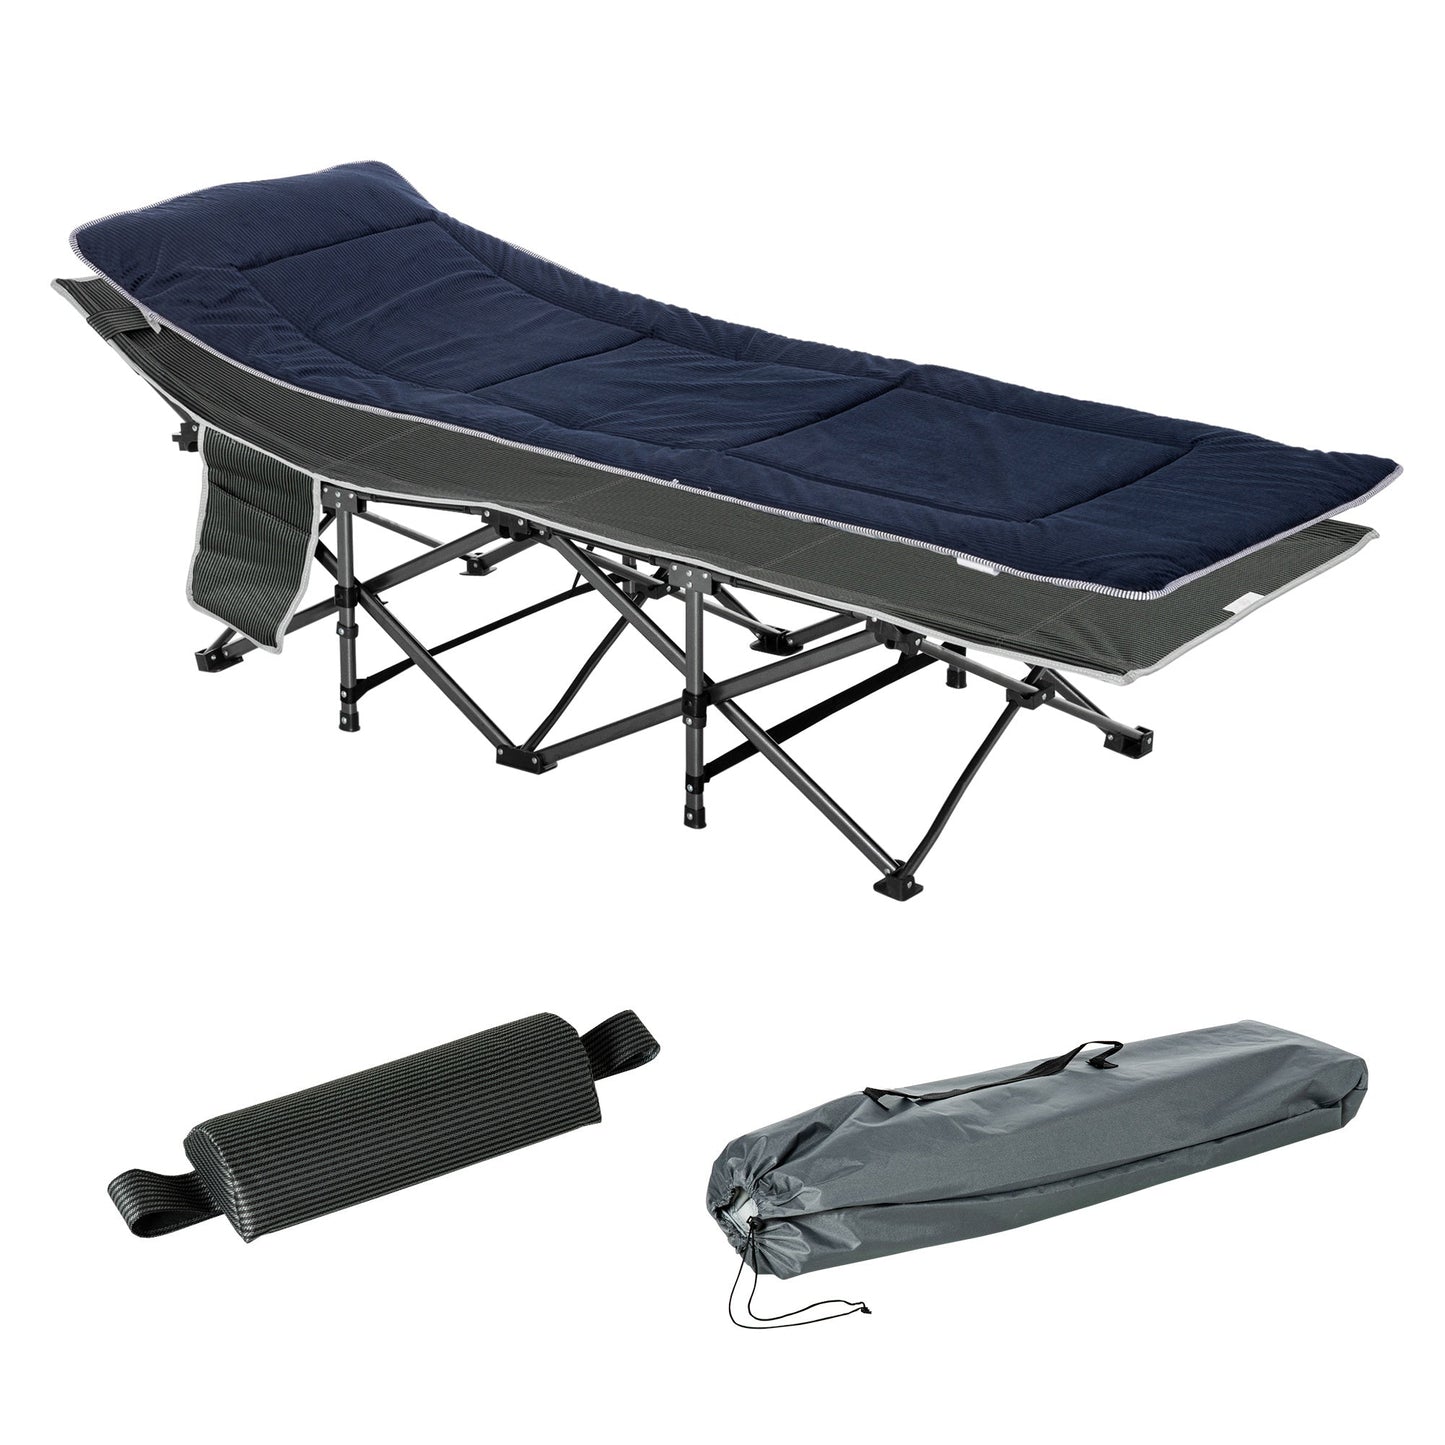 Camping Deckchair/Bed